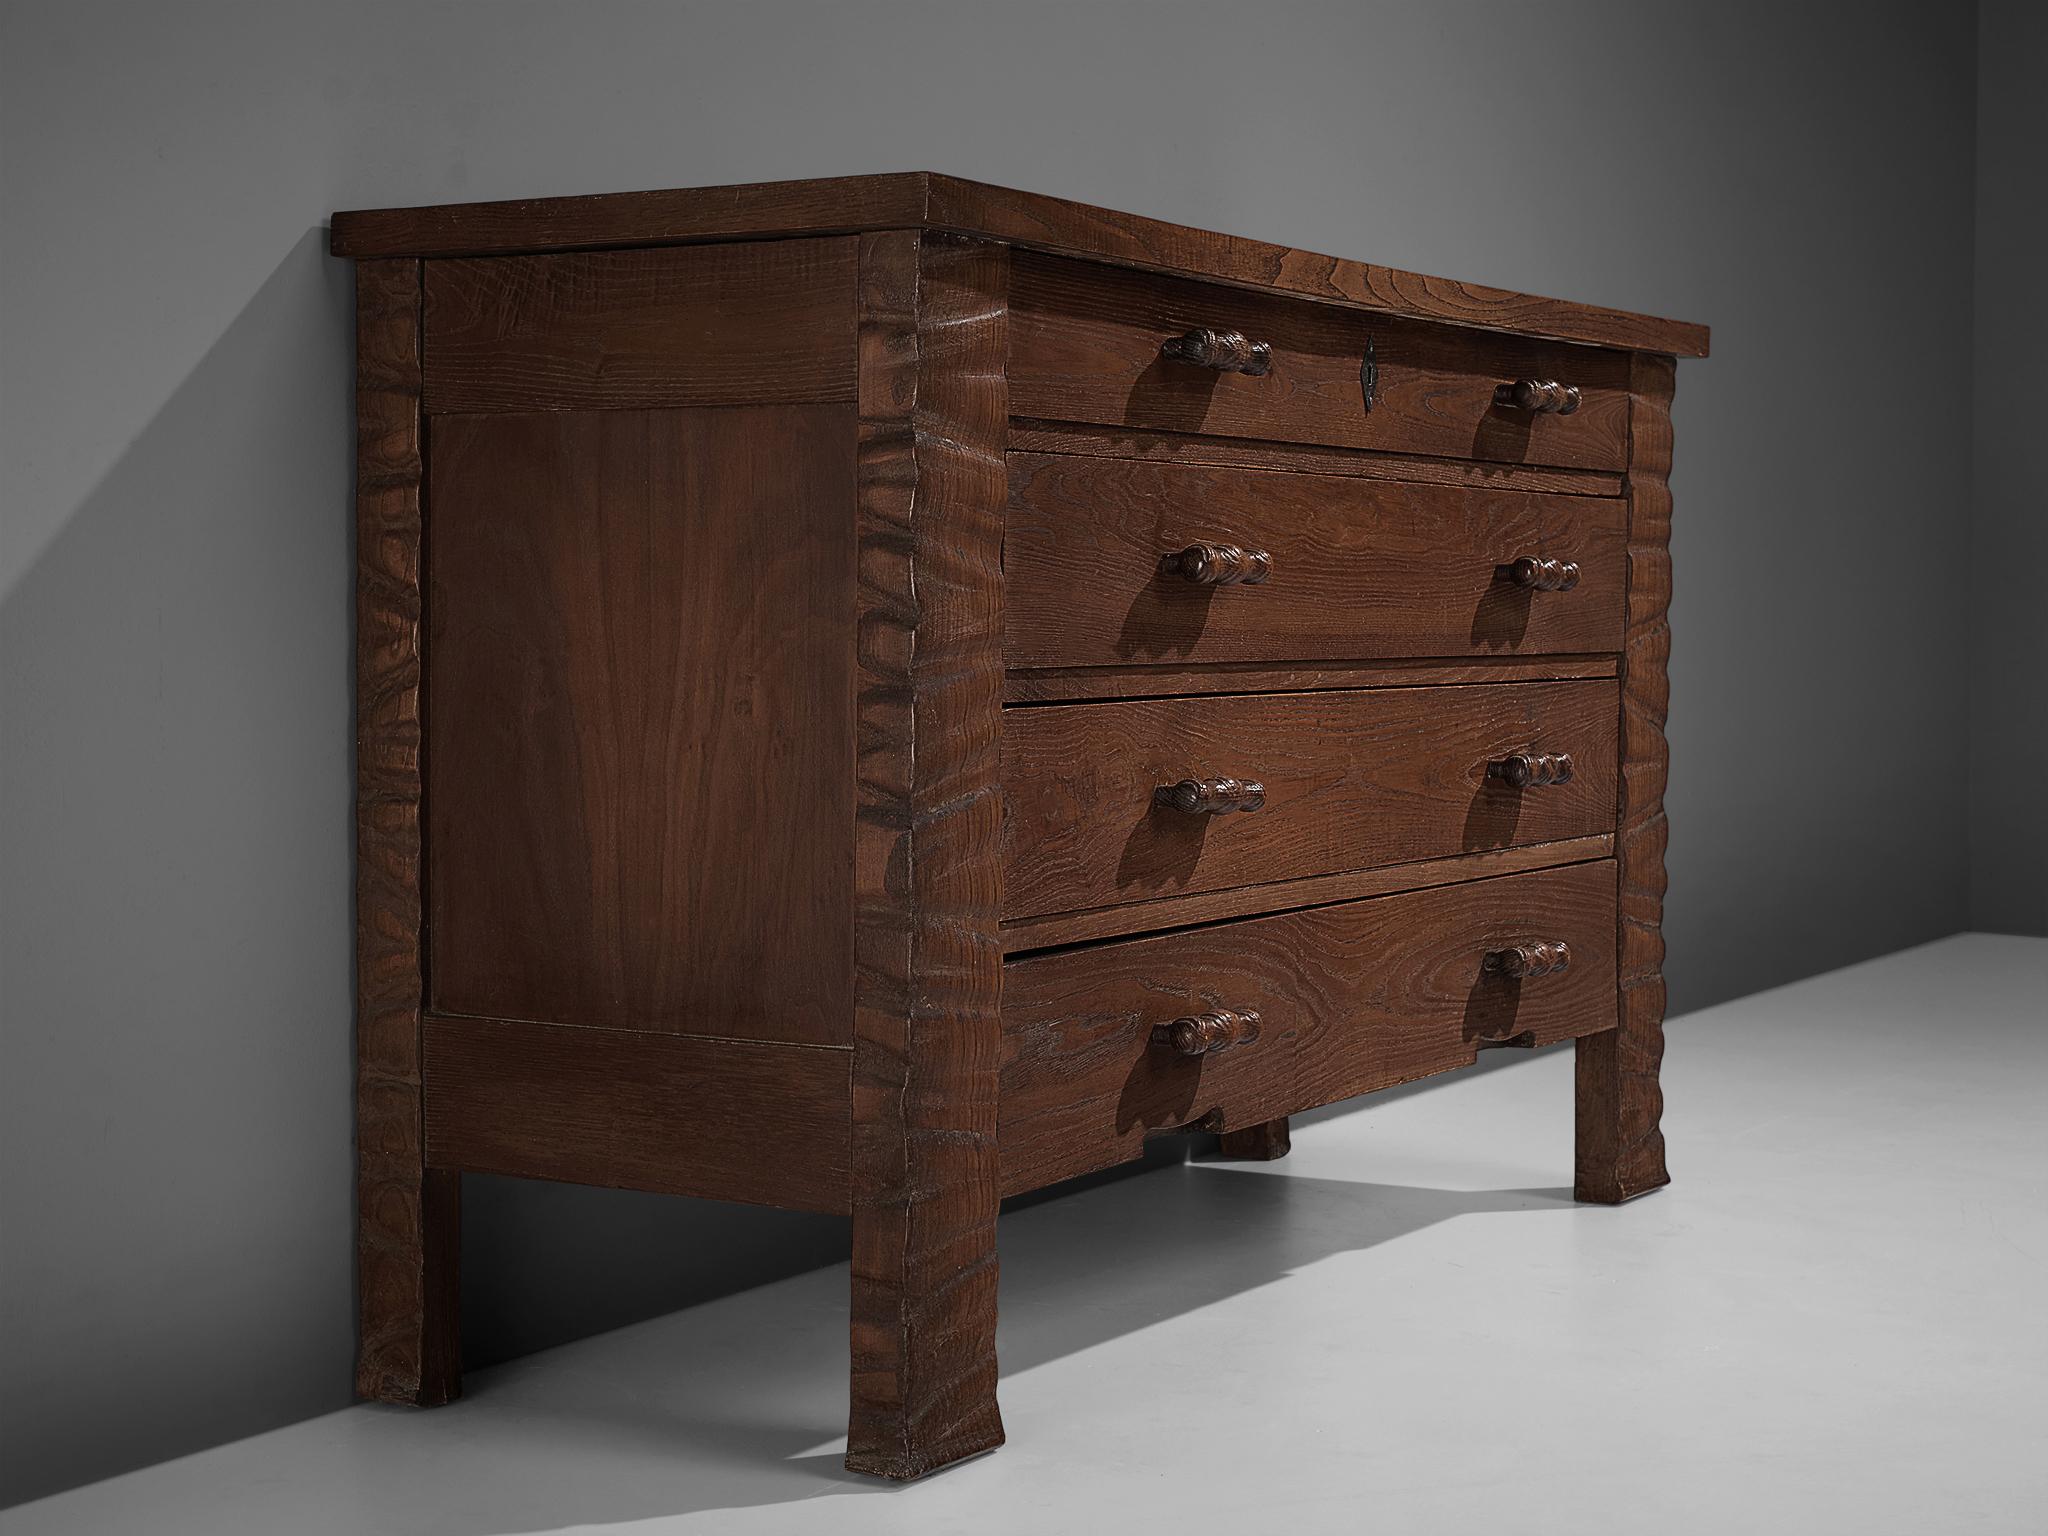 Ernesto Valabrega, chest of drawers, stained oak, brass, glass, Italy, ca. 1935

Chest of drawers with mirror on top. Four large, lockable drawers with two rounded handles each structure the front of the cabinet. The corners are decorated with